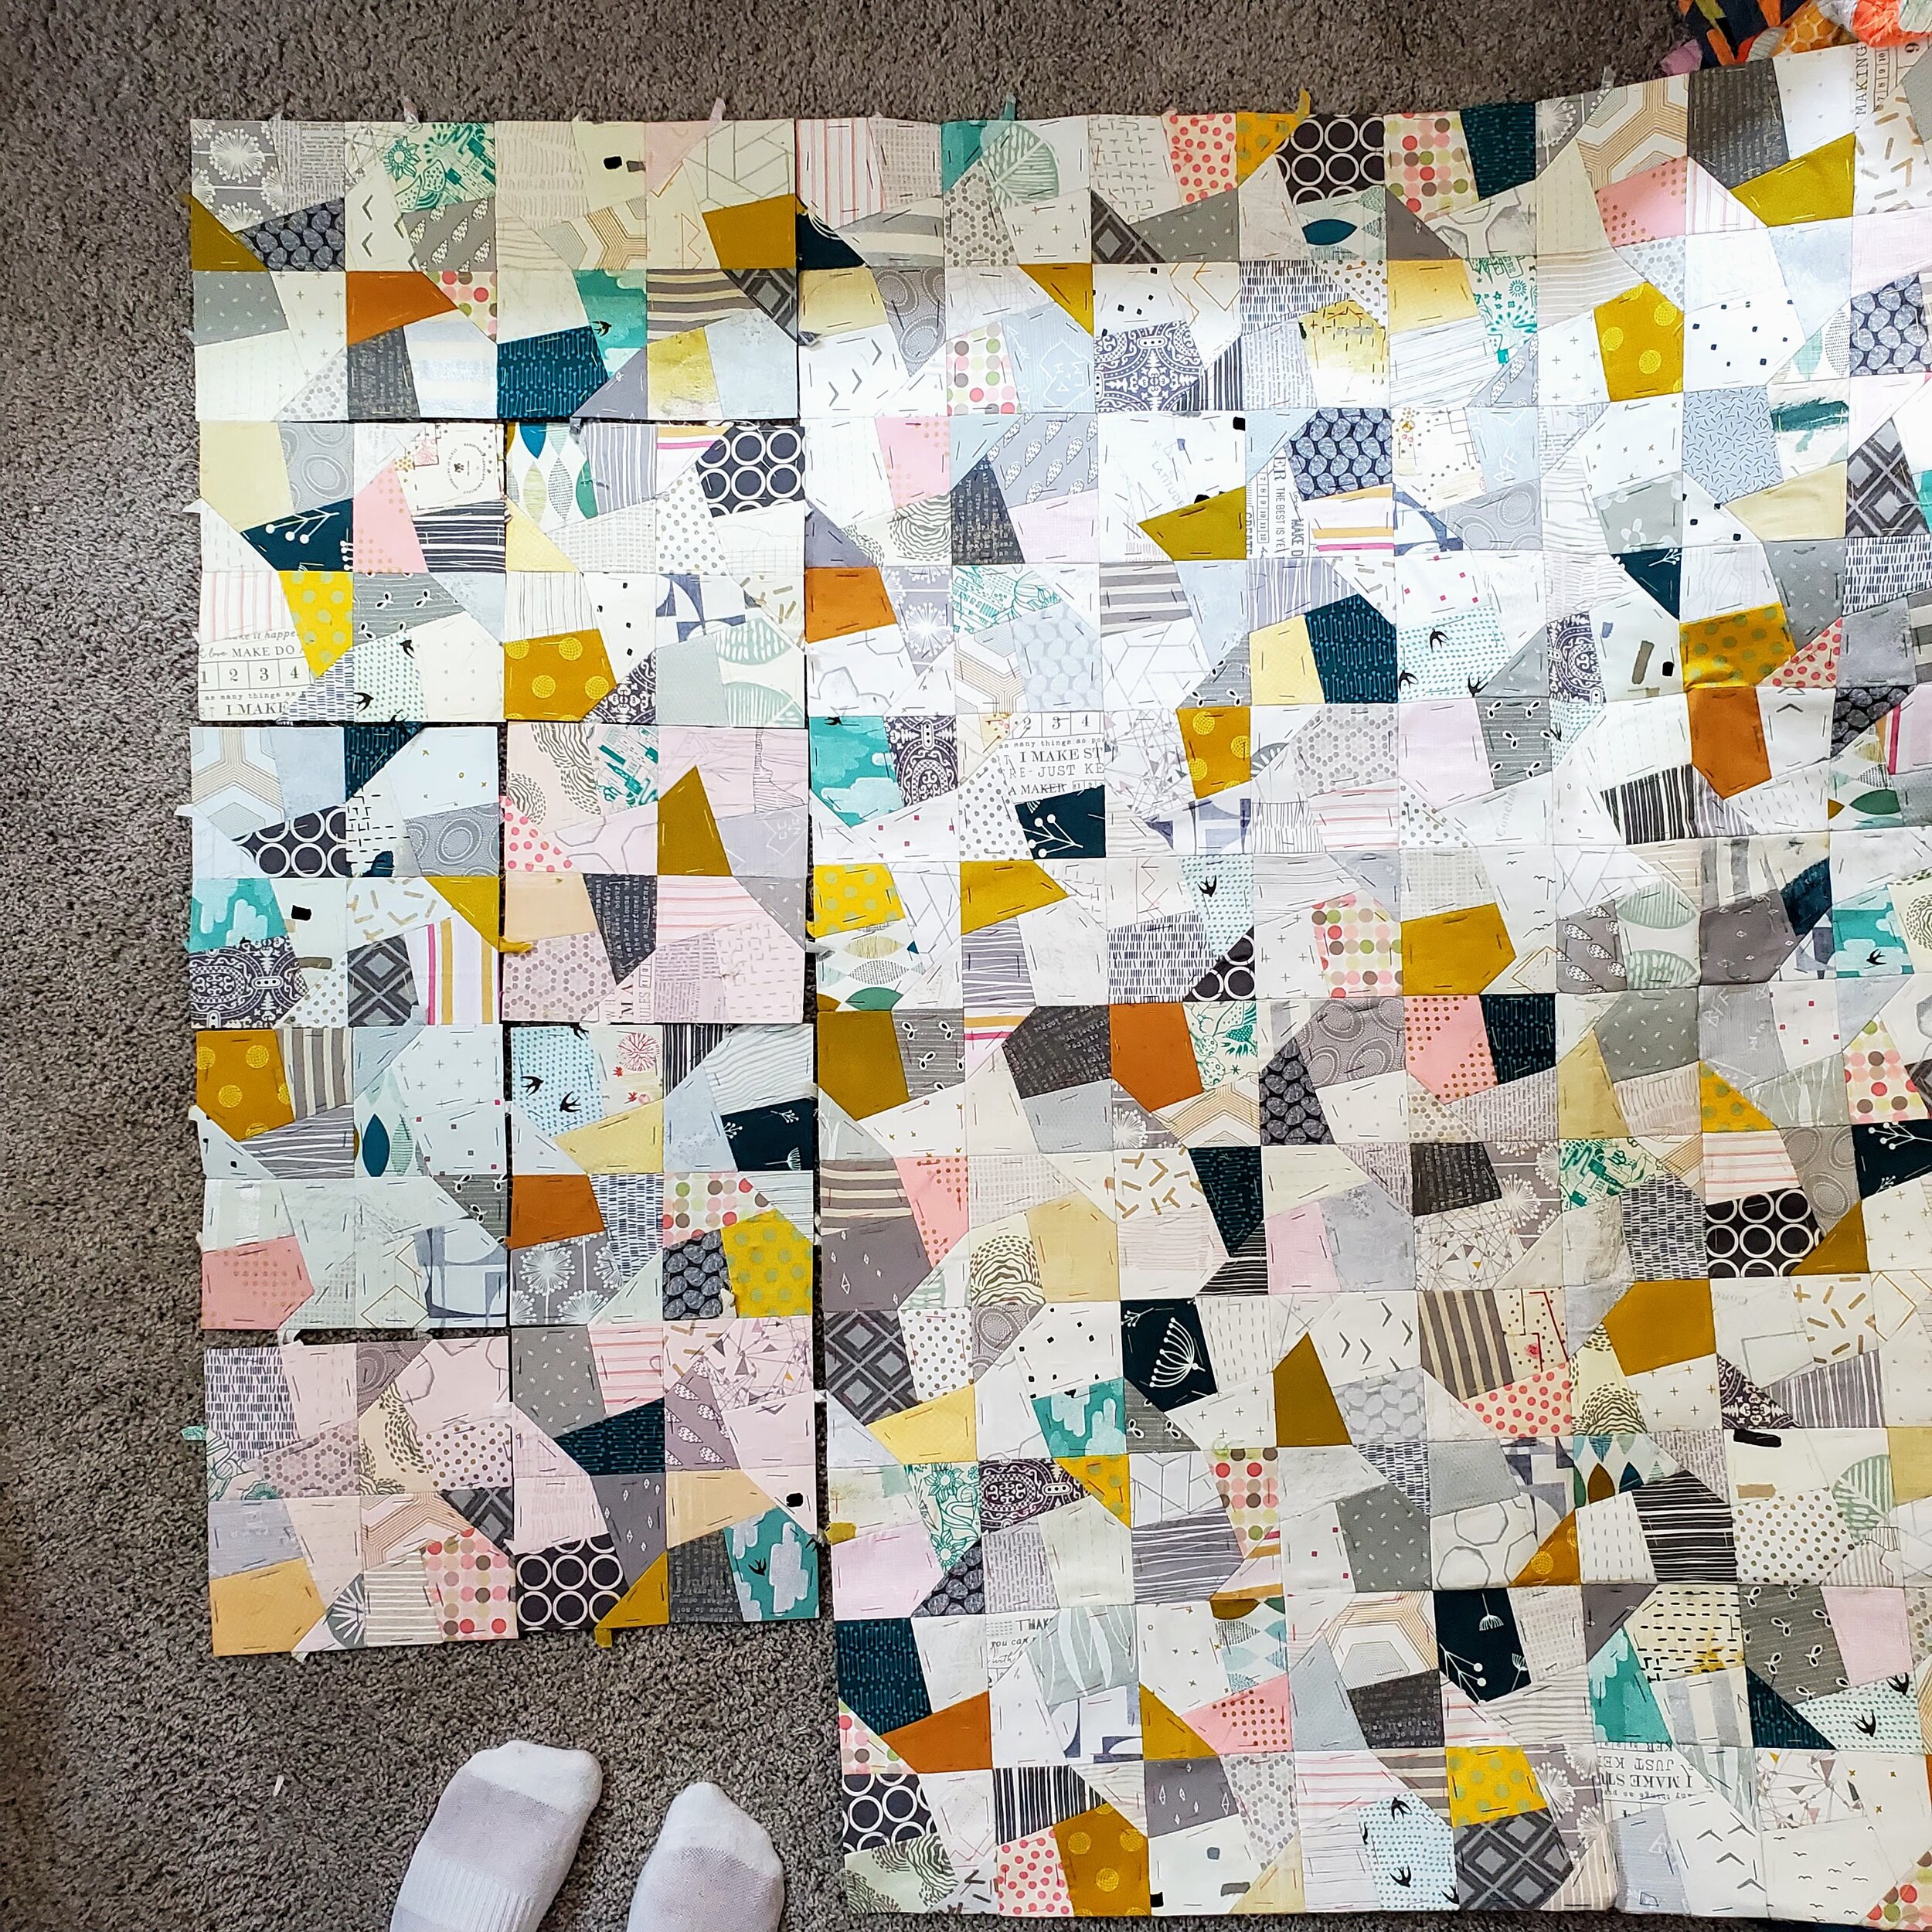 English Paper Piecing Templates to Cut & Quilt: Including Over 500